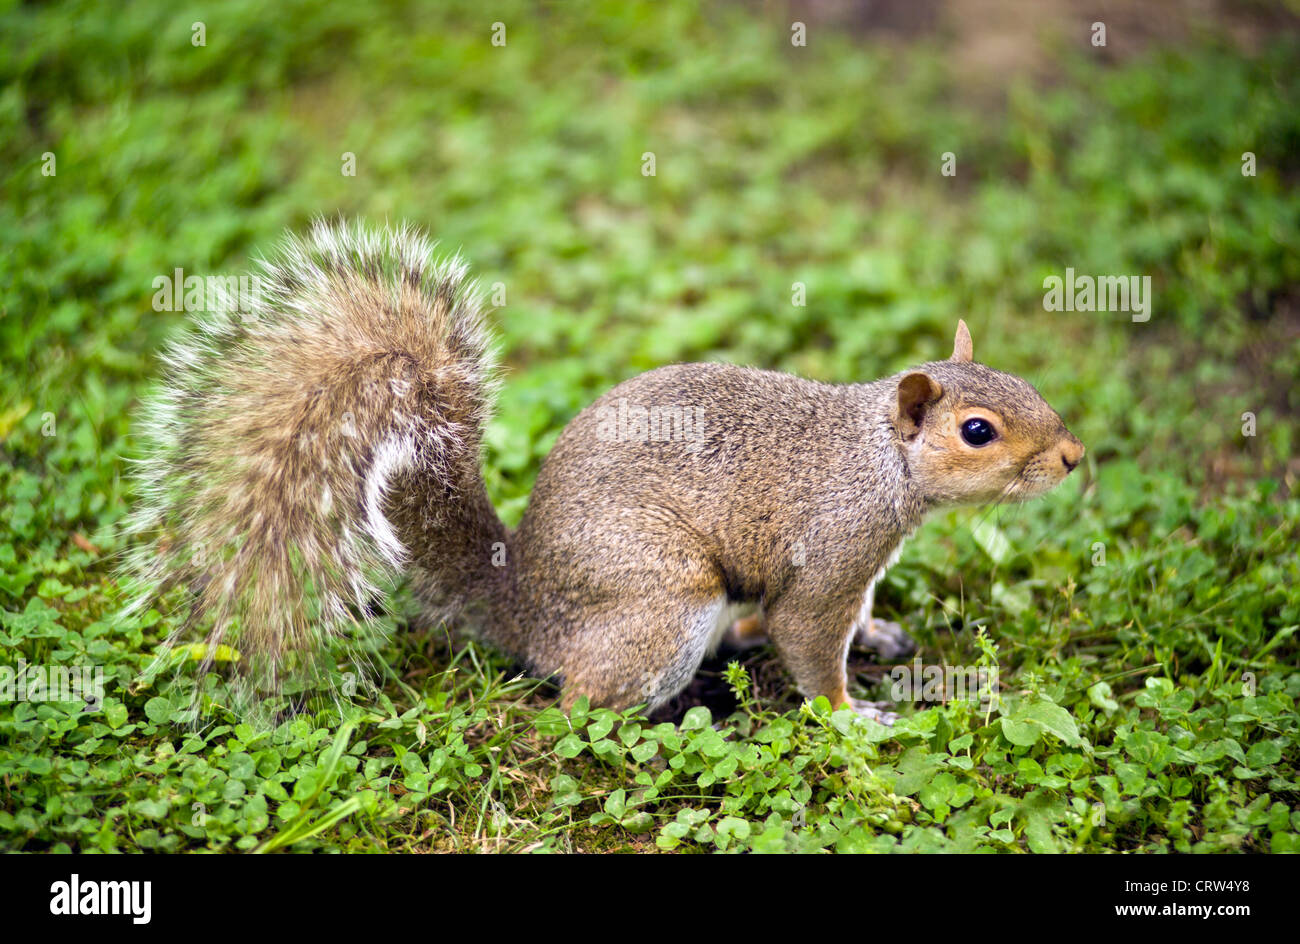 The Eastern Gray Squirrel of North America is recognized by its grayish-brown fur and silver-tipped hairs on its bushy tail. Stock Photo